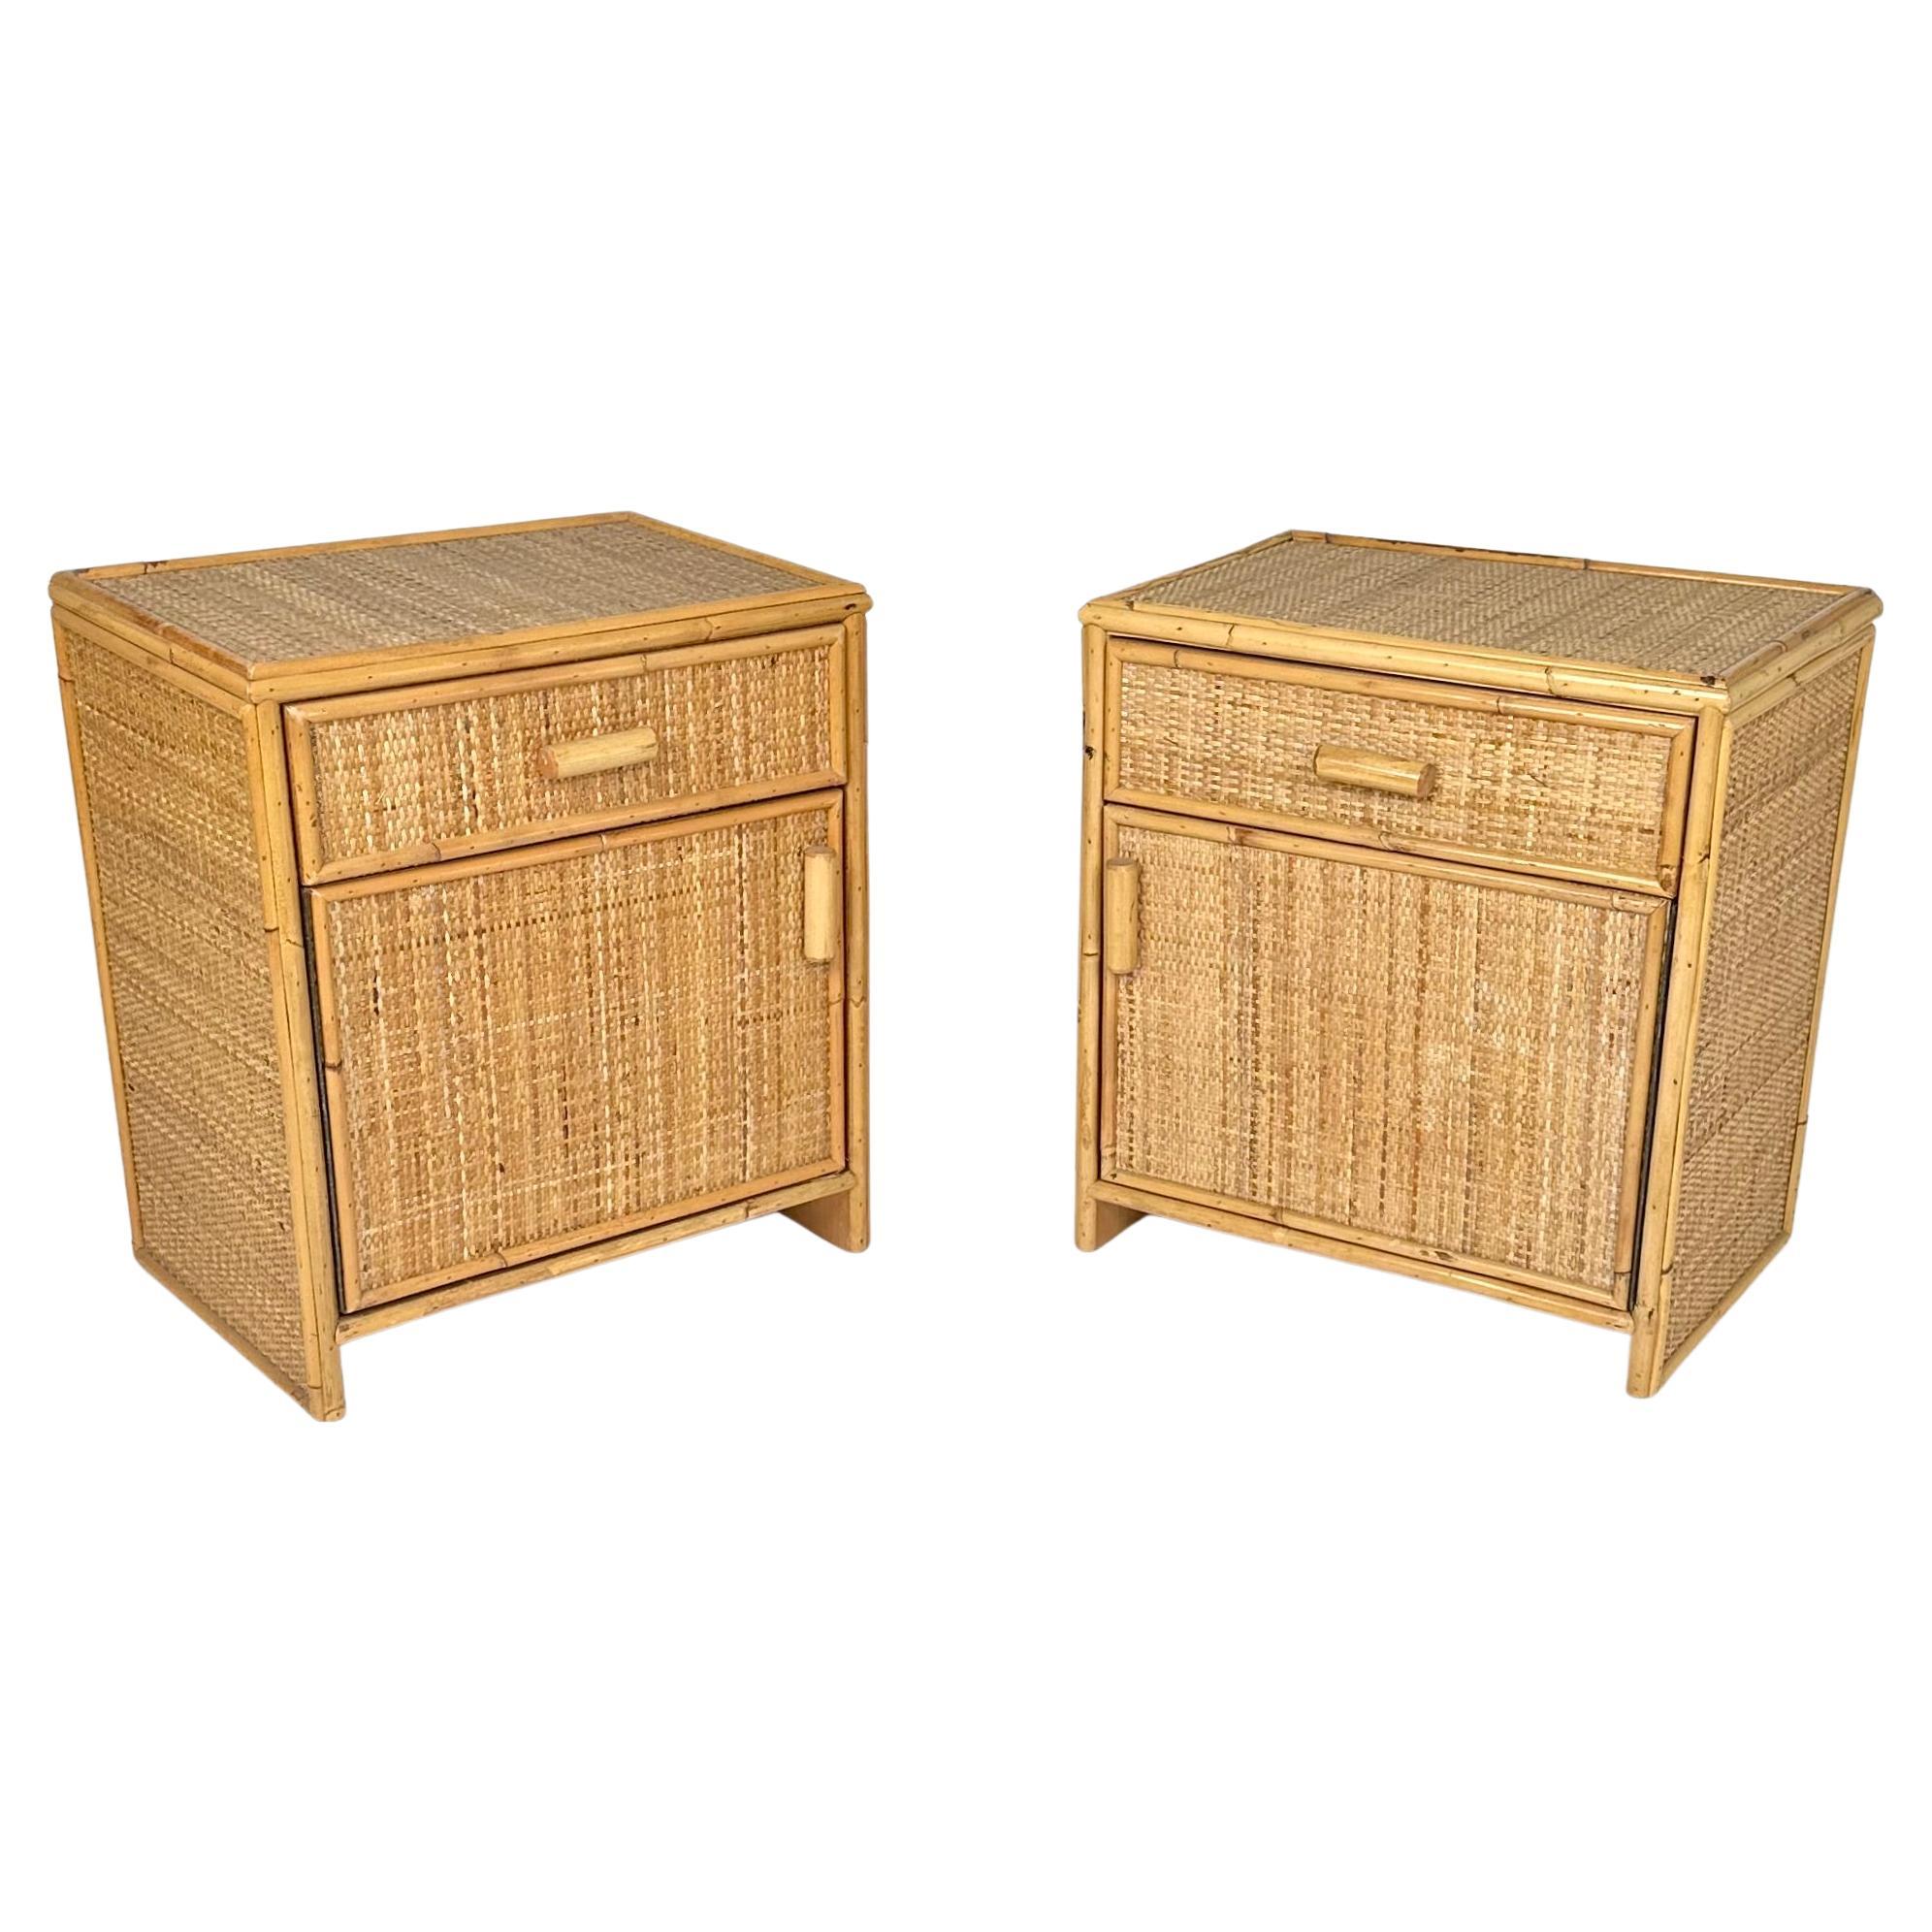 Midcentury pair of bed side table nightstands in bamboo and rattan with two drawer.

Made in Italy in the 1970s.